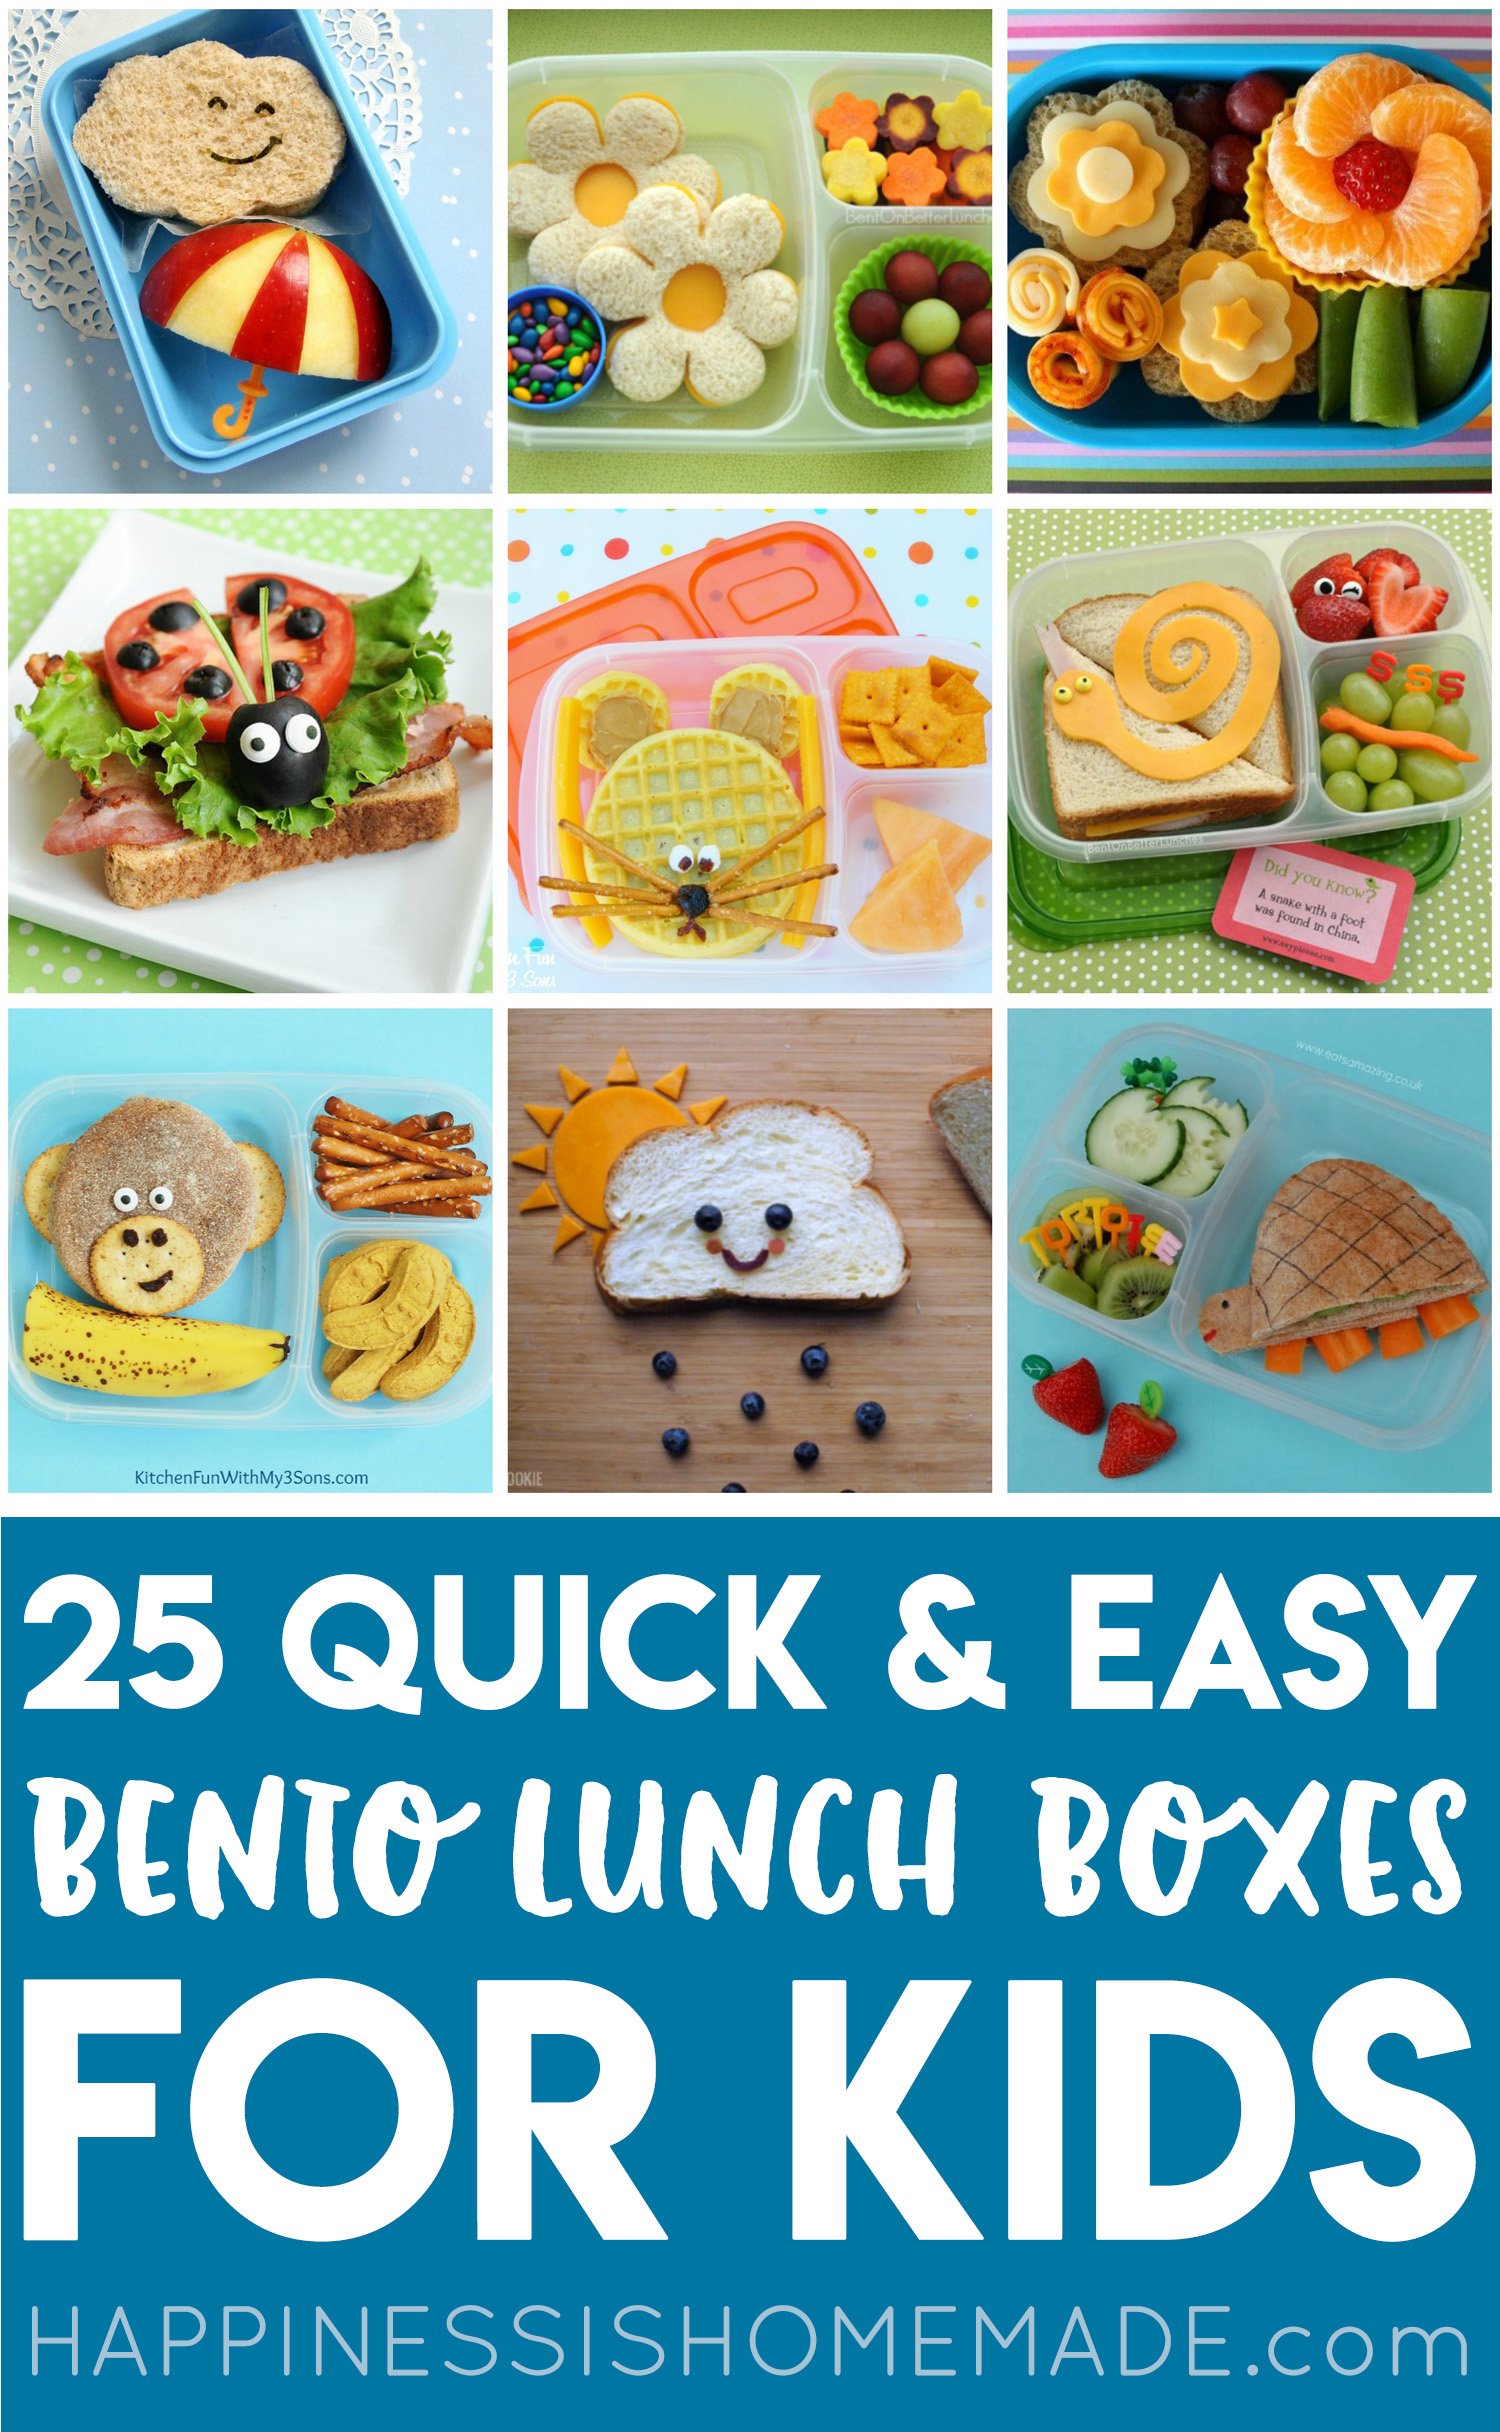 25 quick and easy bento lunch boxes